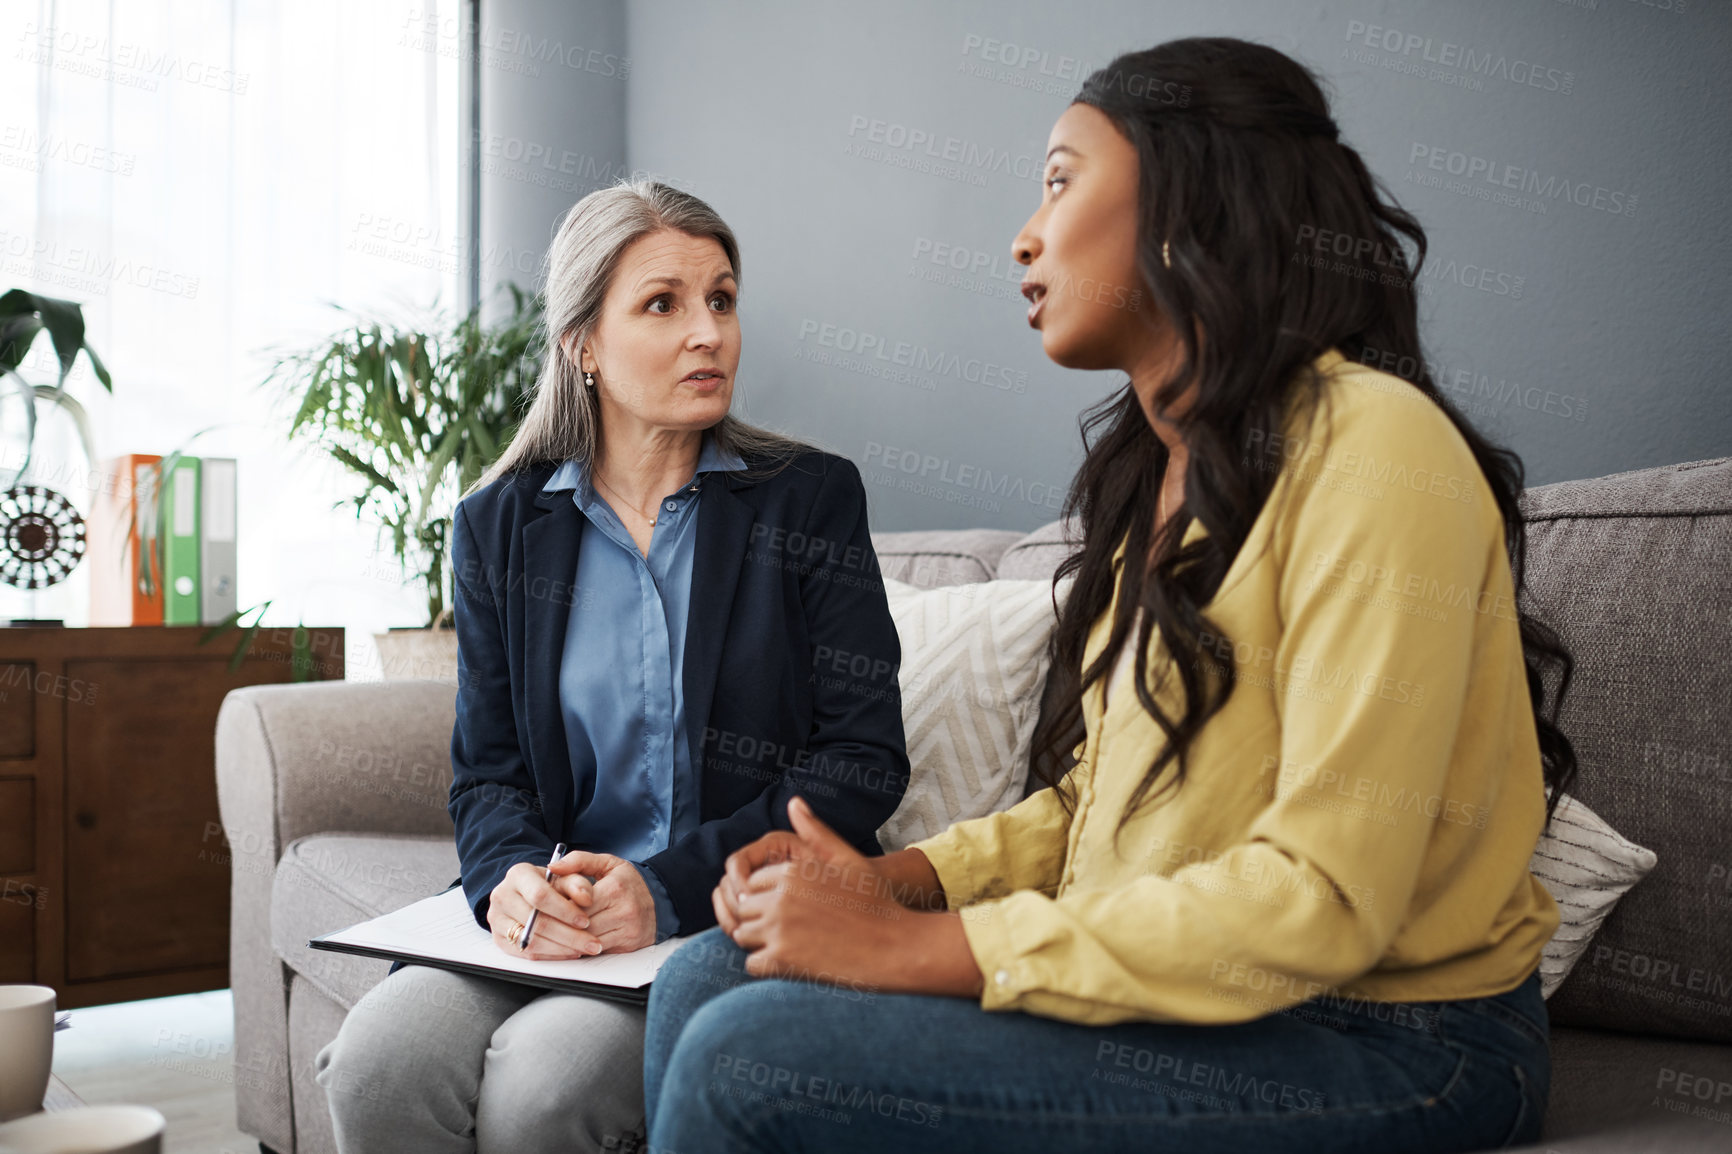 Buy stock photo Shot of a young woman having a meeting with her advisor